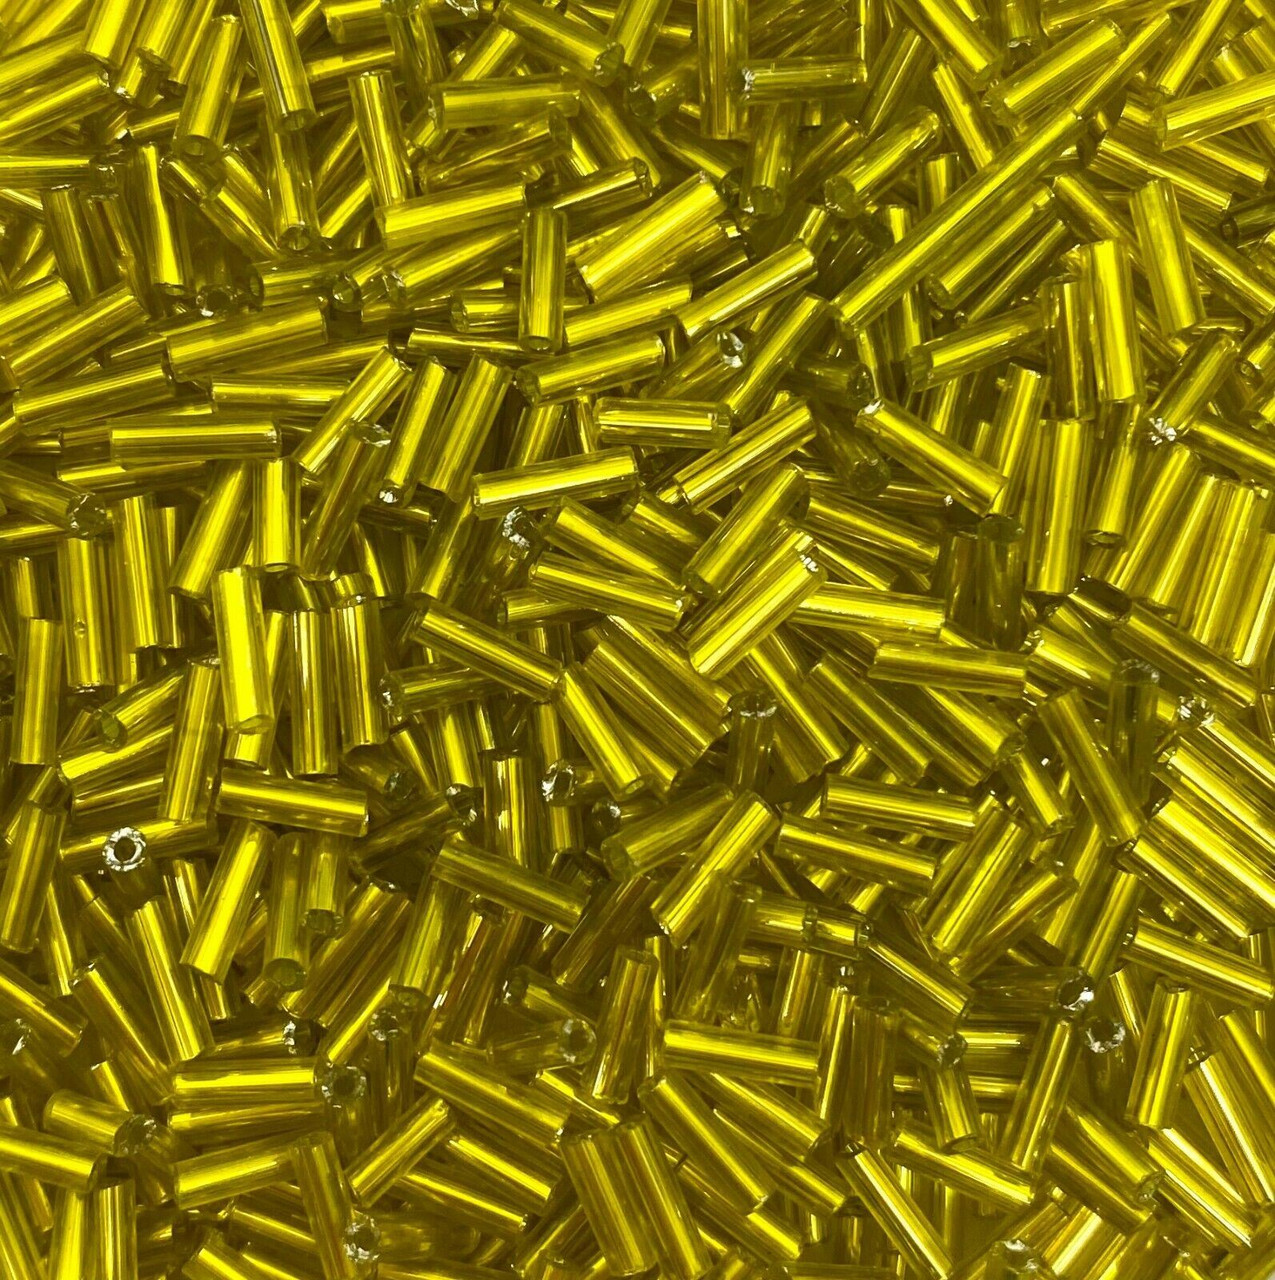 50g glass bugle beads - Yellow Silver-Lined - approx 6mm